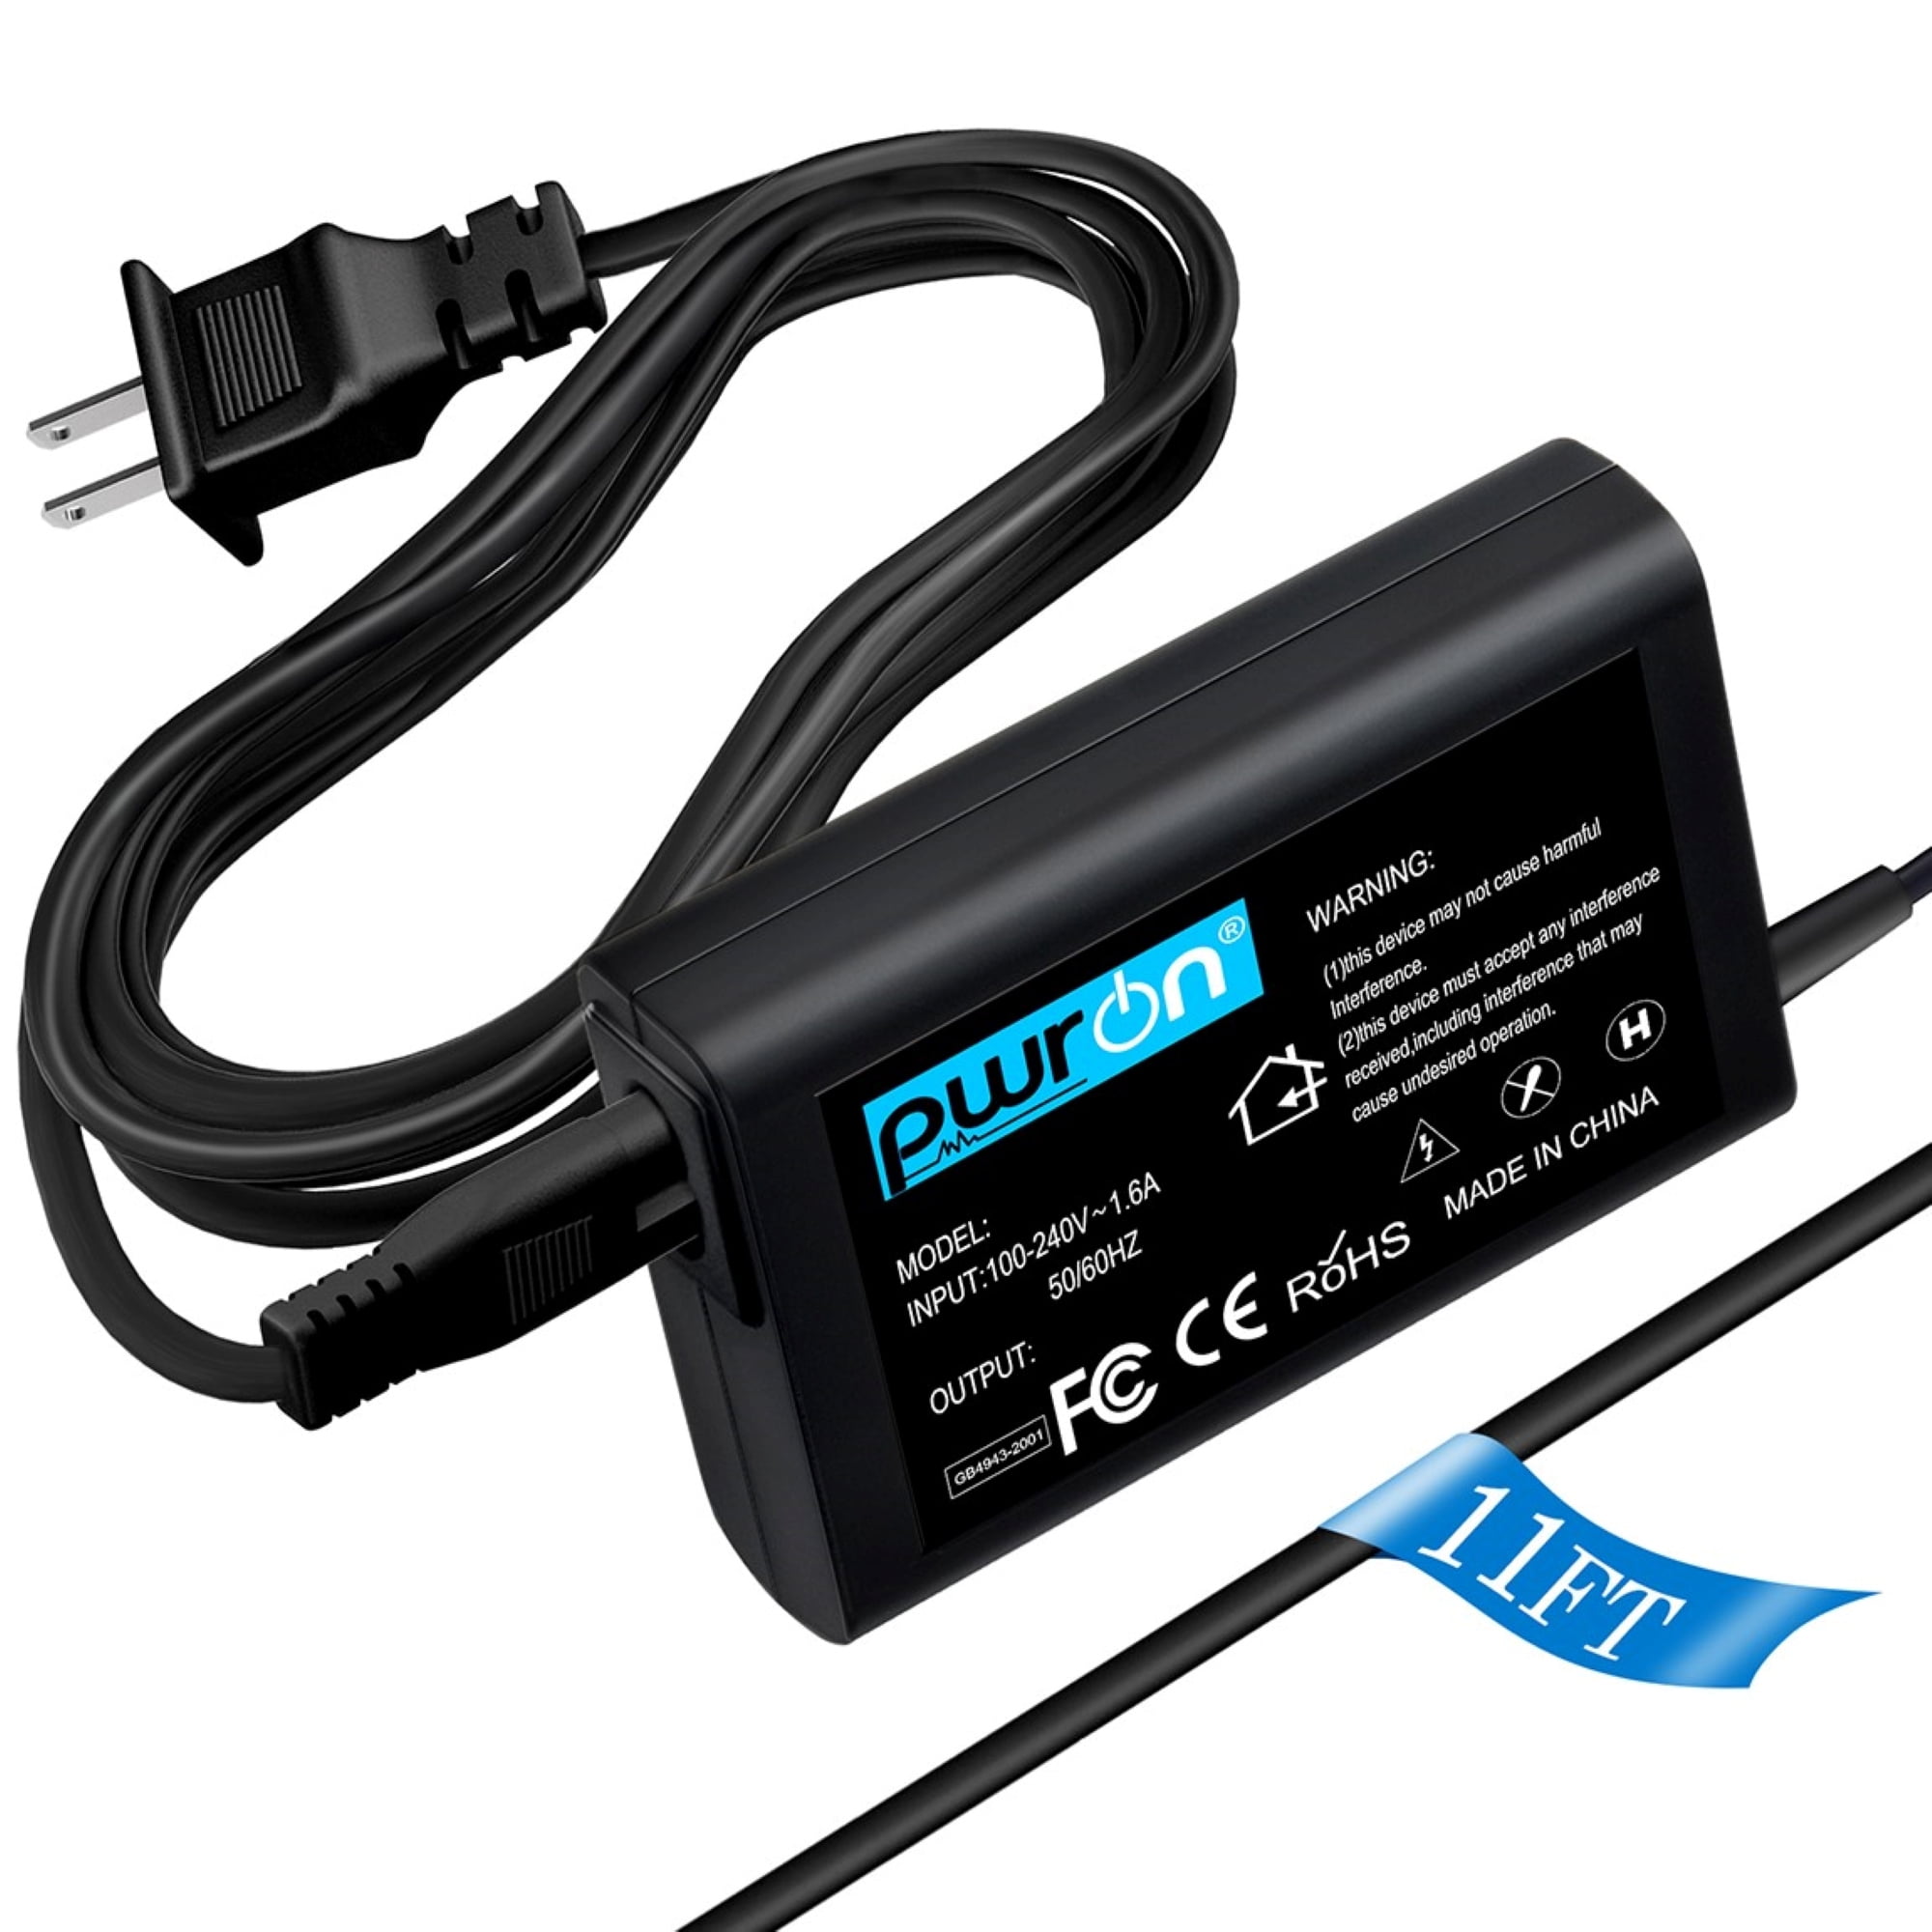 Accessory USA AC DC Adapter for Roland HP-503 HP-504 HP503 HP504 Digital Piano Power Supply Cord